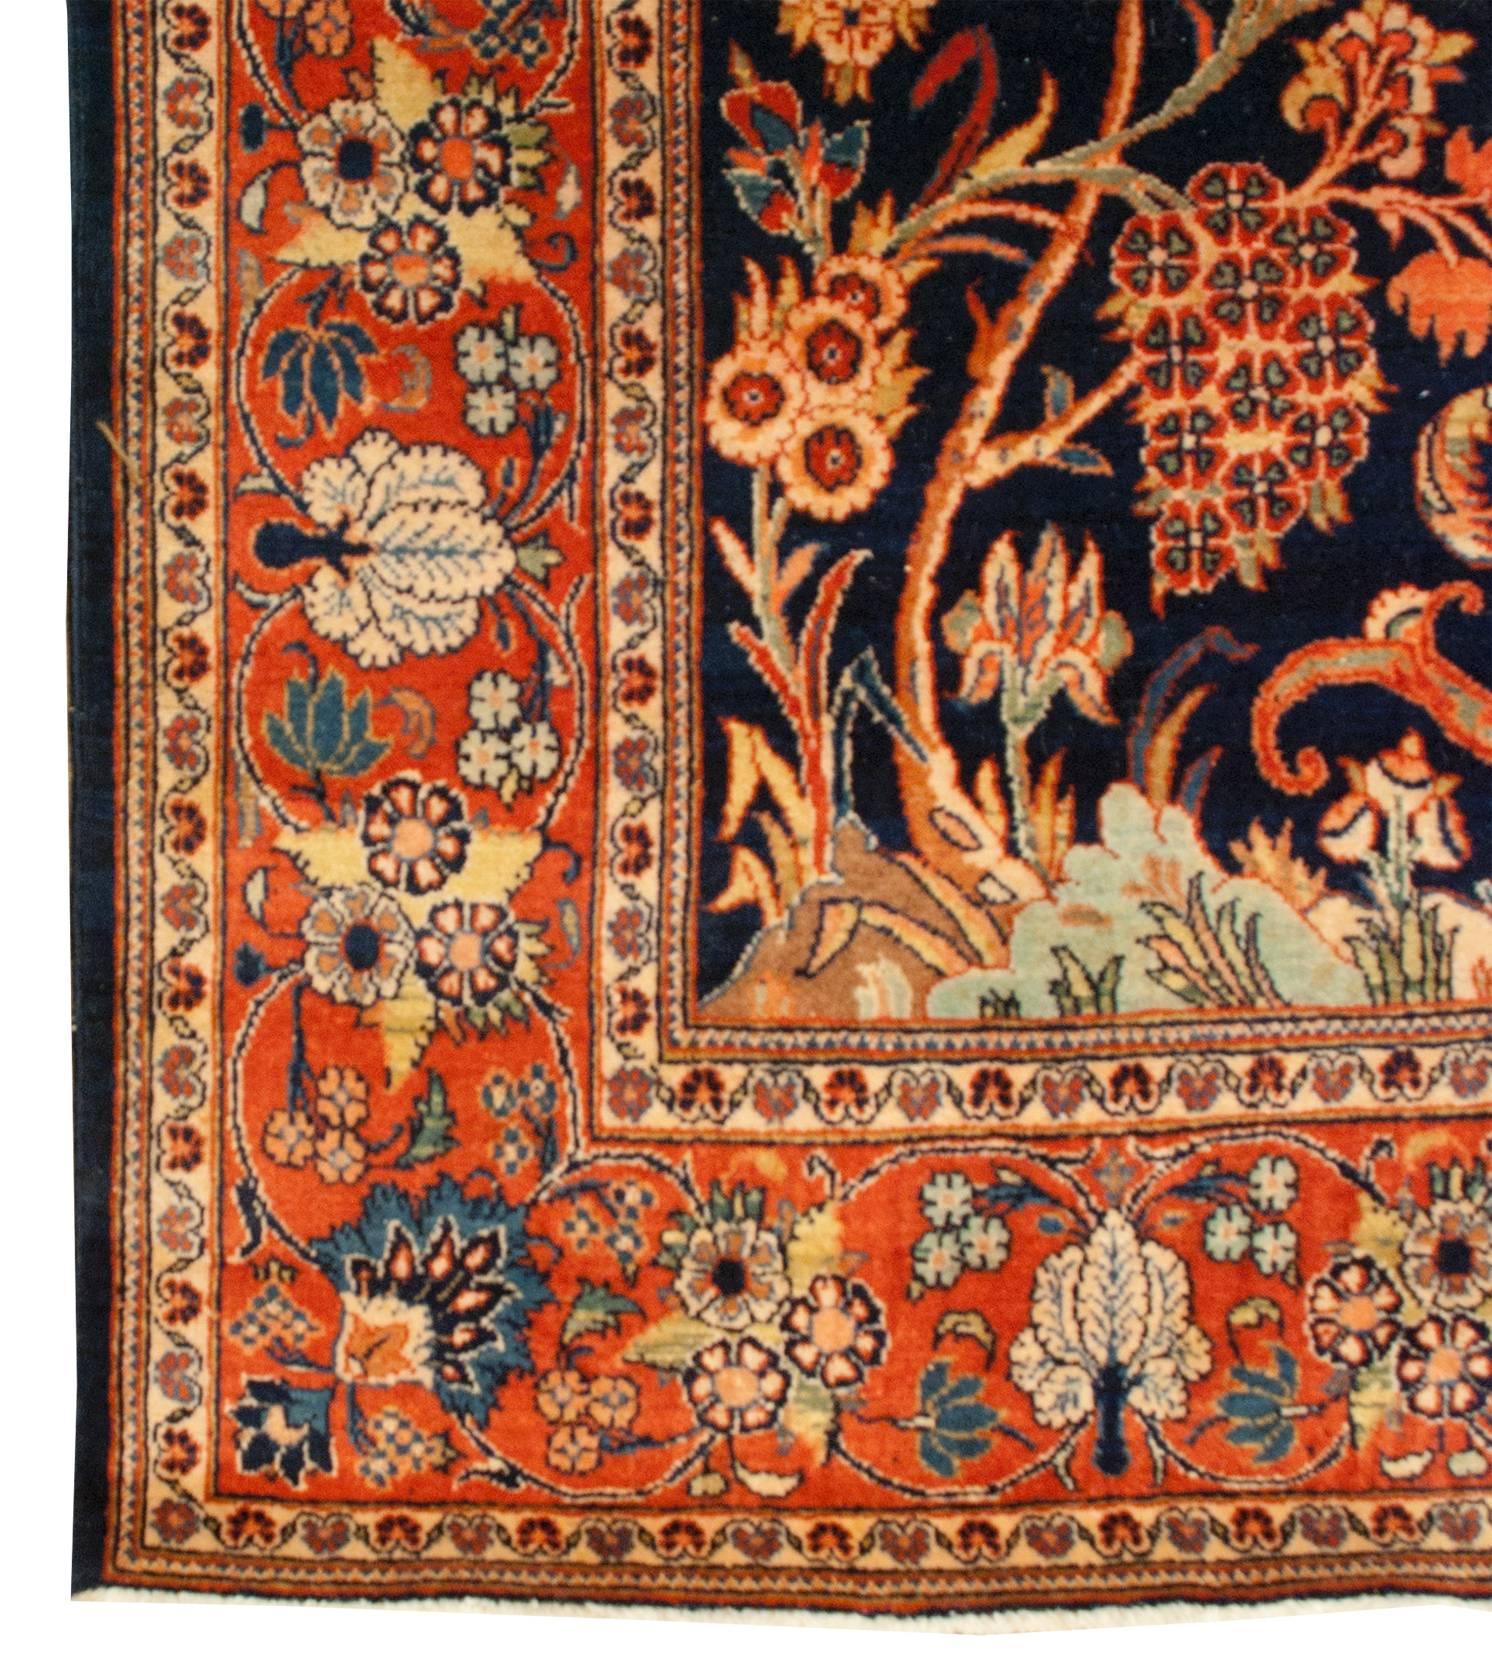 A superb early 20th century Persian Kashan prayer rug with a skillfully woven design of a vase, immensely potted with myriad multicolored flowers, in the center of a deep indigo background. Surrounding the vase are real trees, dripping with